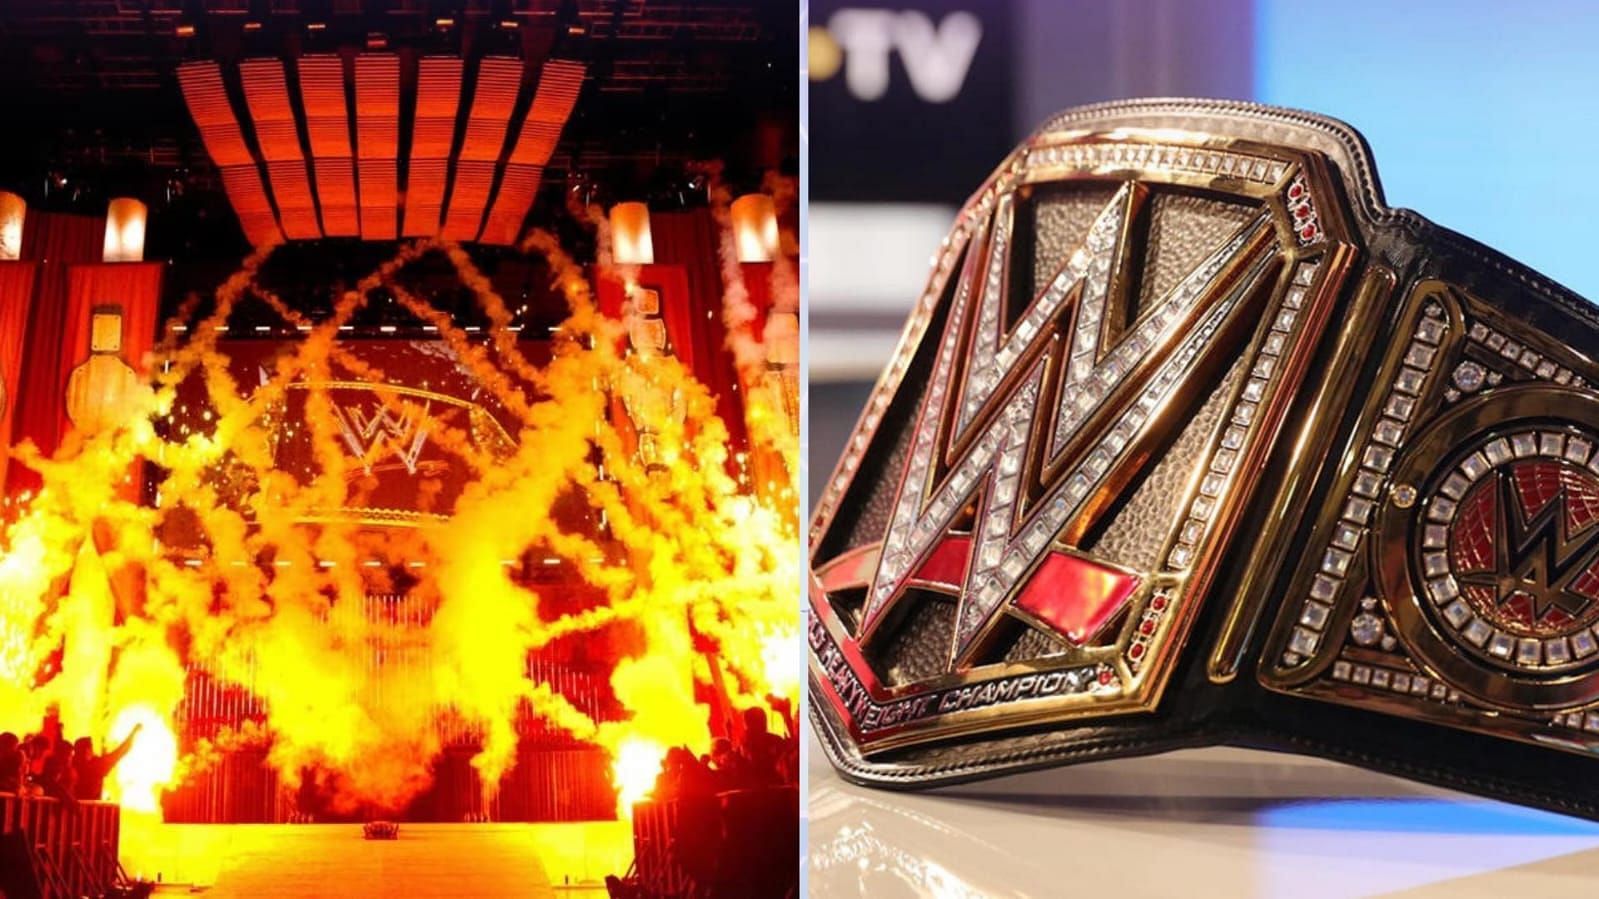 A former WWE Champion is scheduled to take some time off